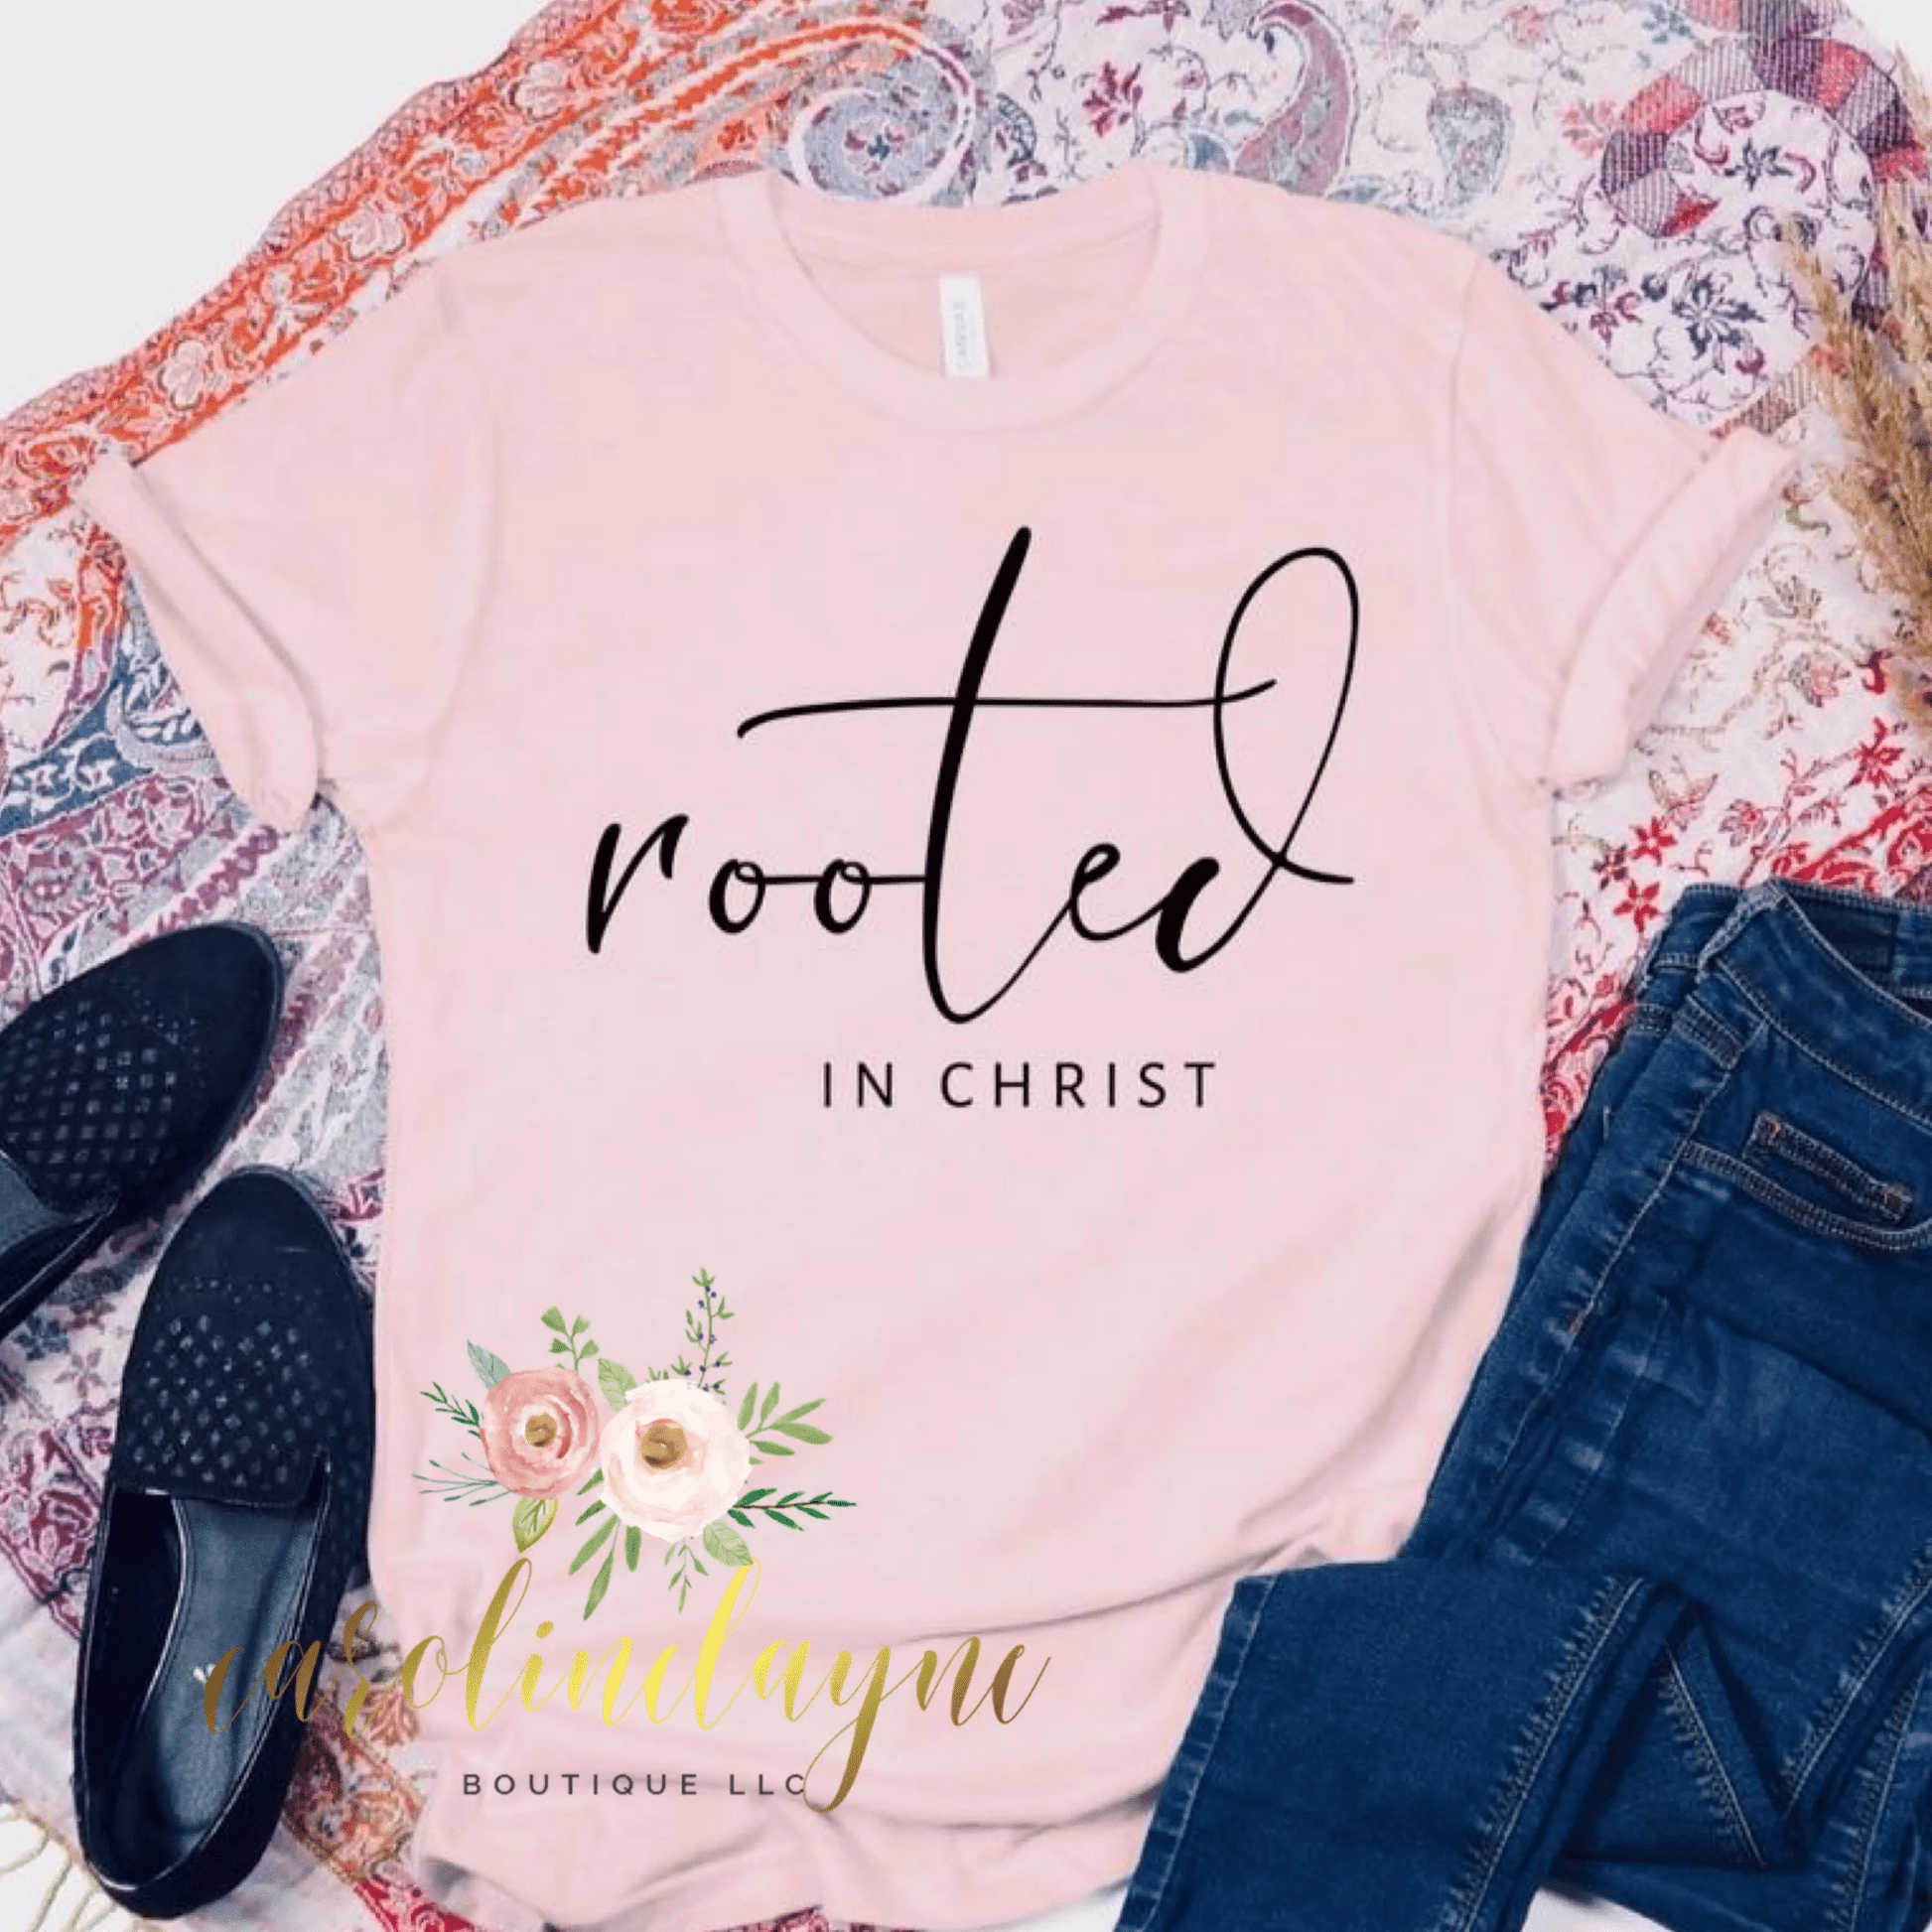 Rooted in Christ tee - Caroline Layne Boutique LLC